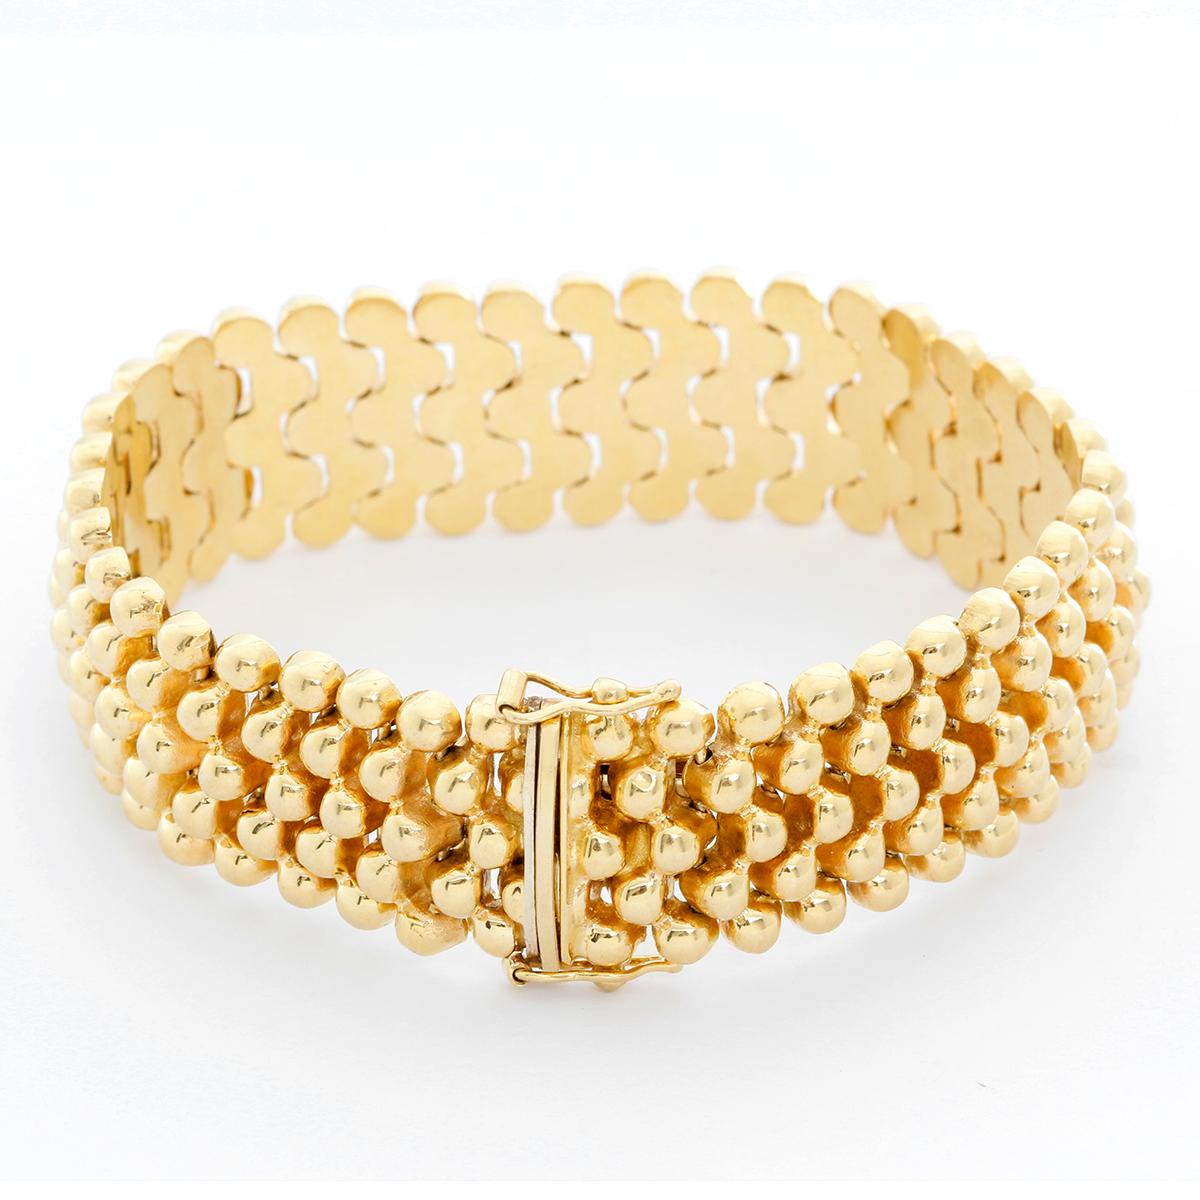 5 Strands Gold Bead Bracelet In Excellent Condition For Sale In Dallas, TX